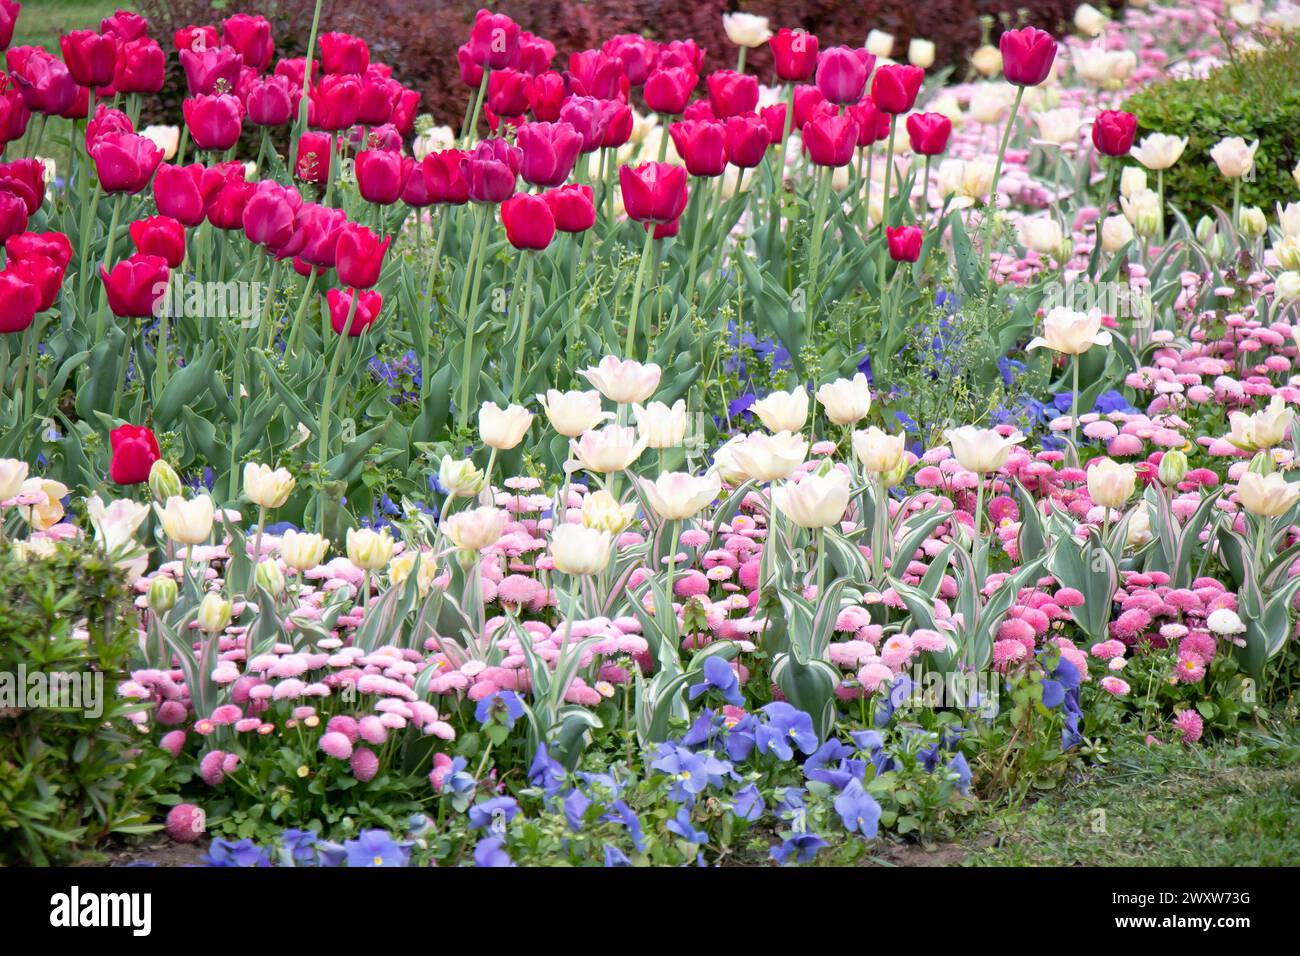 Spring flowers layout in public garden with tulips Stock Photo